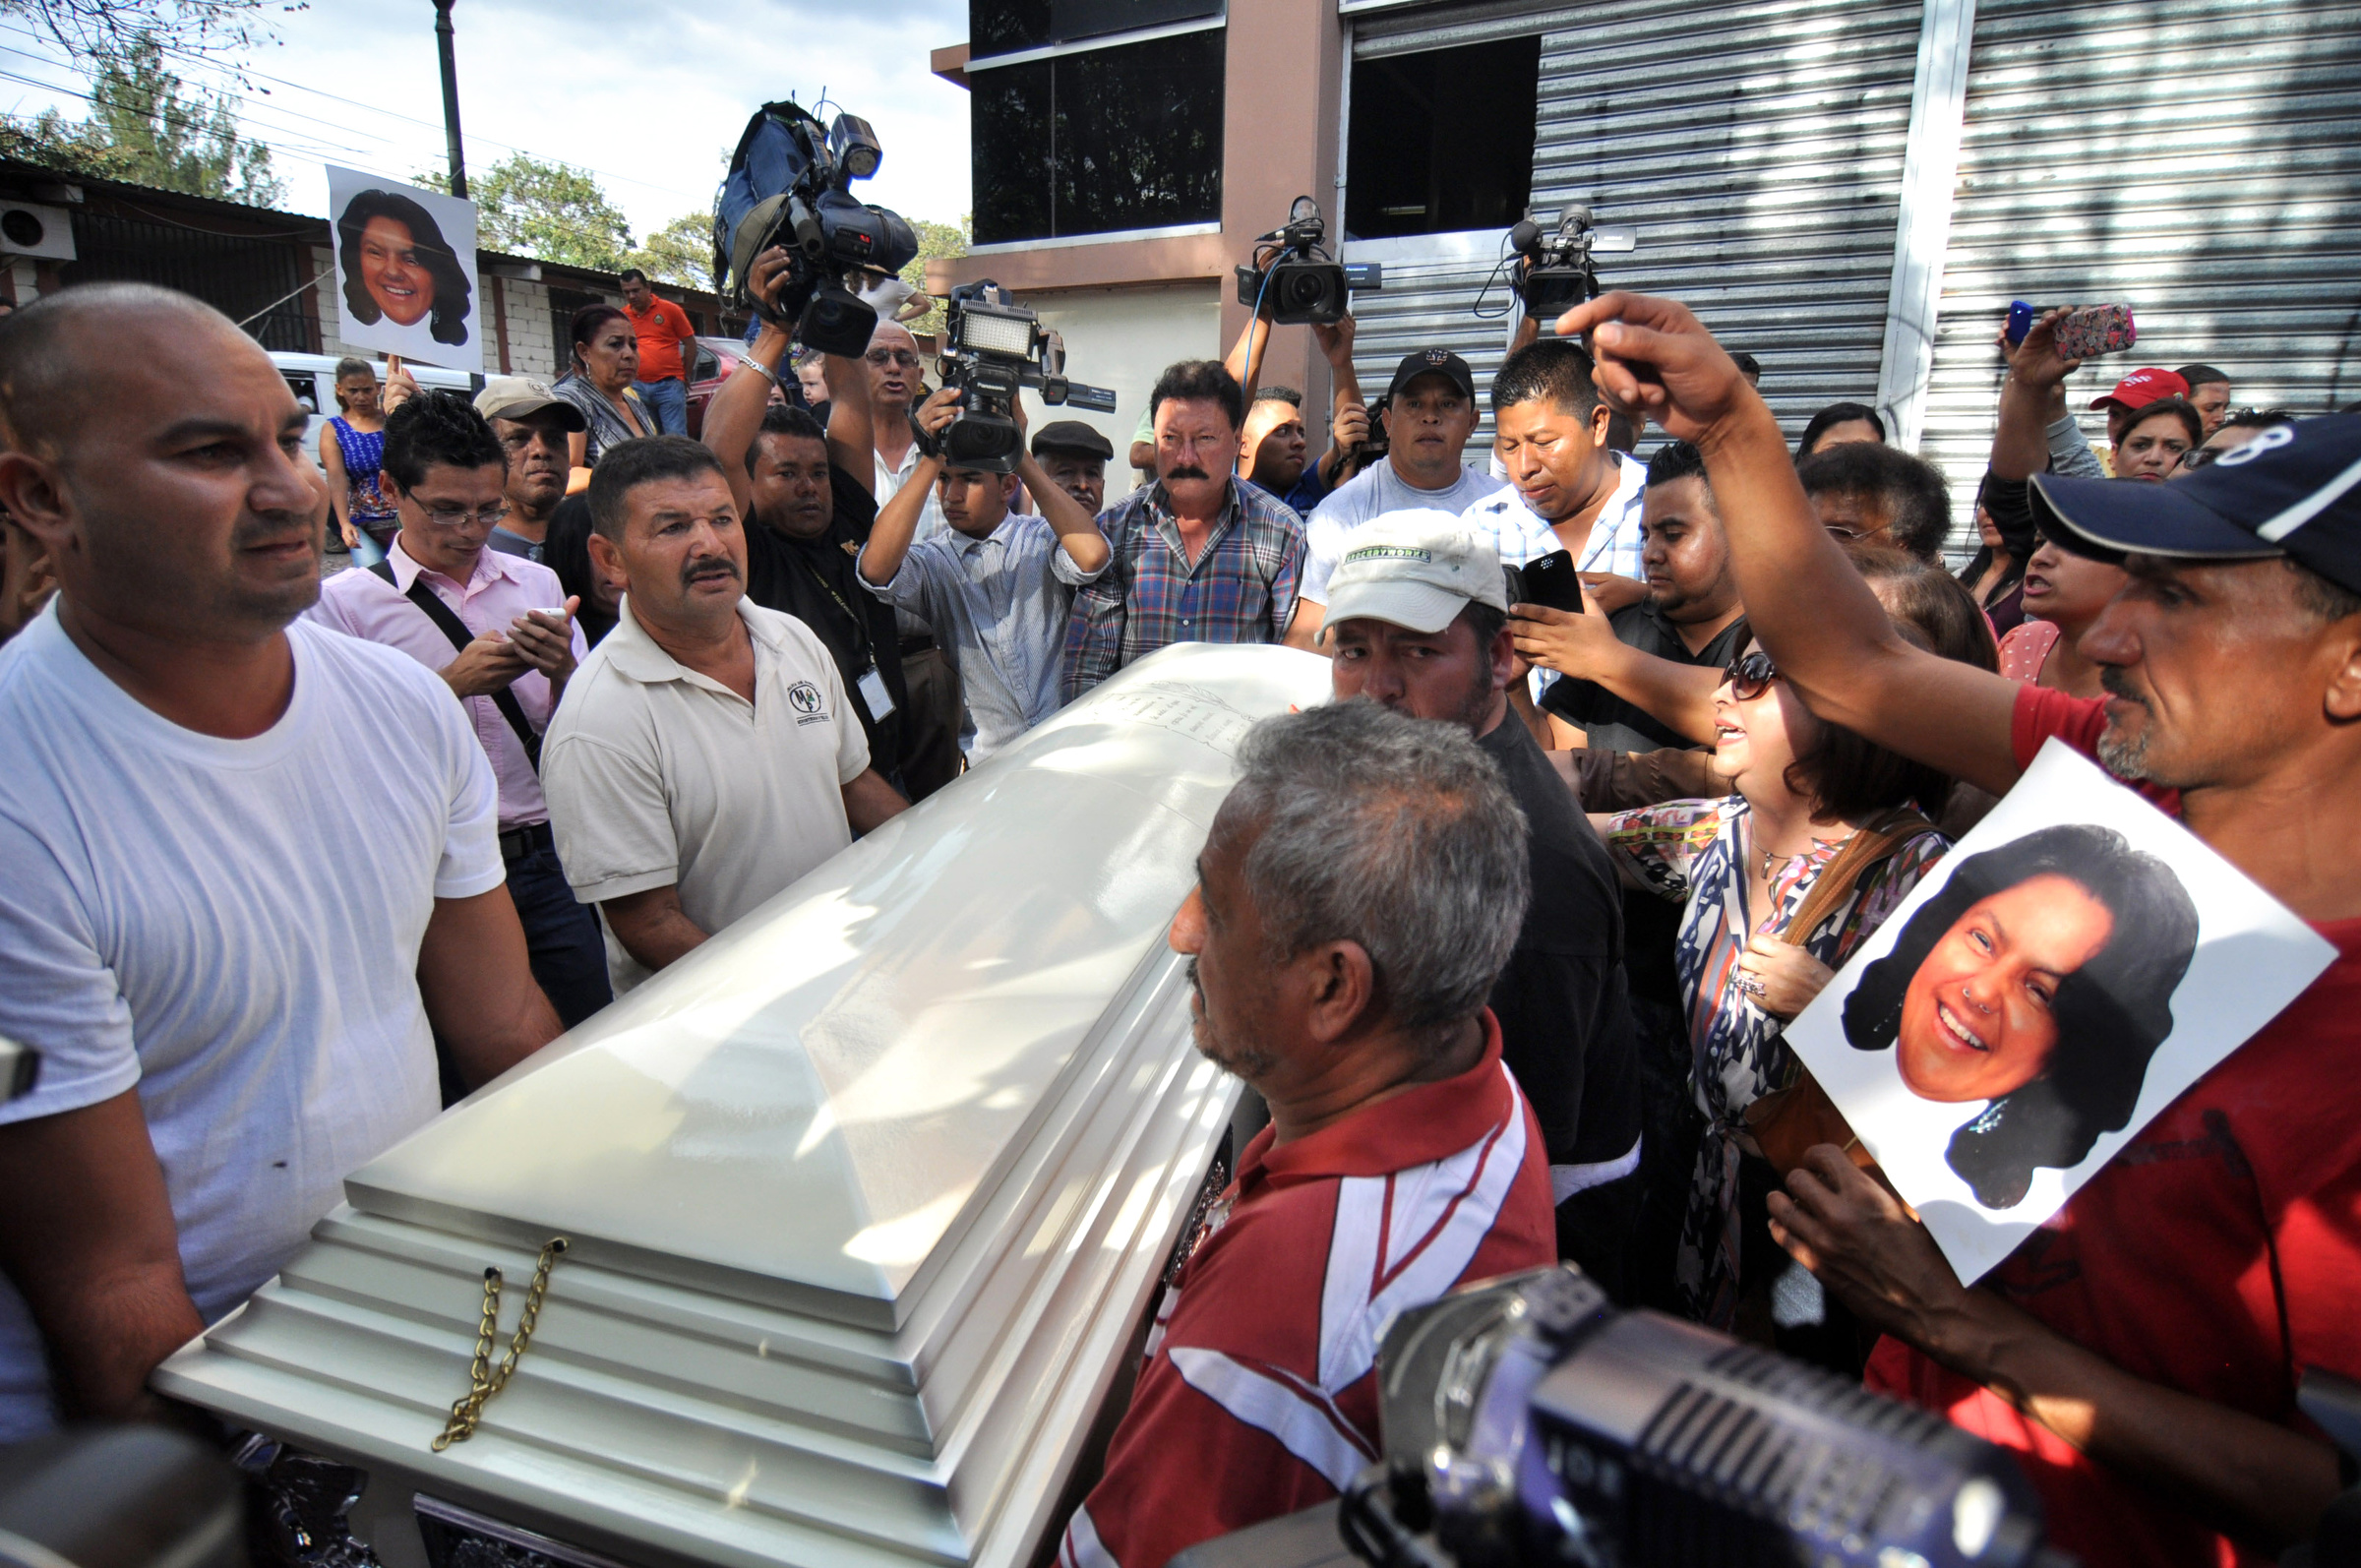 People carry the coffin of indigenous leader and environmental activist Berta Caceres after a five-hour autopsy at the Forensic Medicine Center in Tegucigalpa, Honduras, March 3. (CNS/EPA/Stringer) 